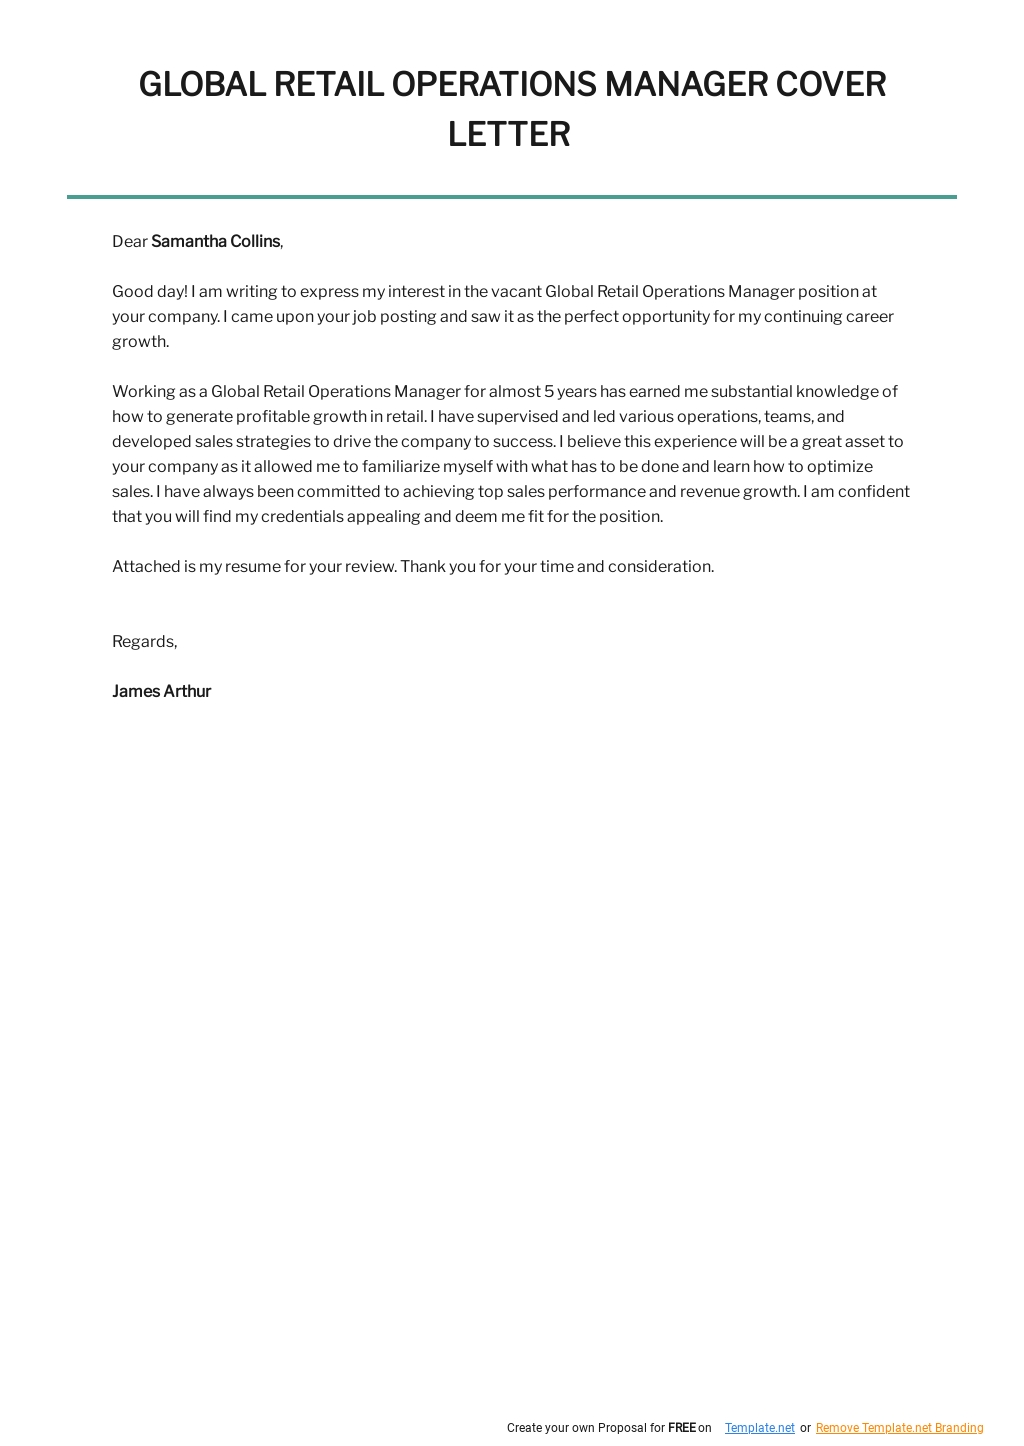 Free Global Retail Operations Manager Cover Letter Template.jpe